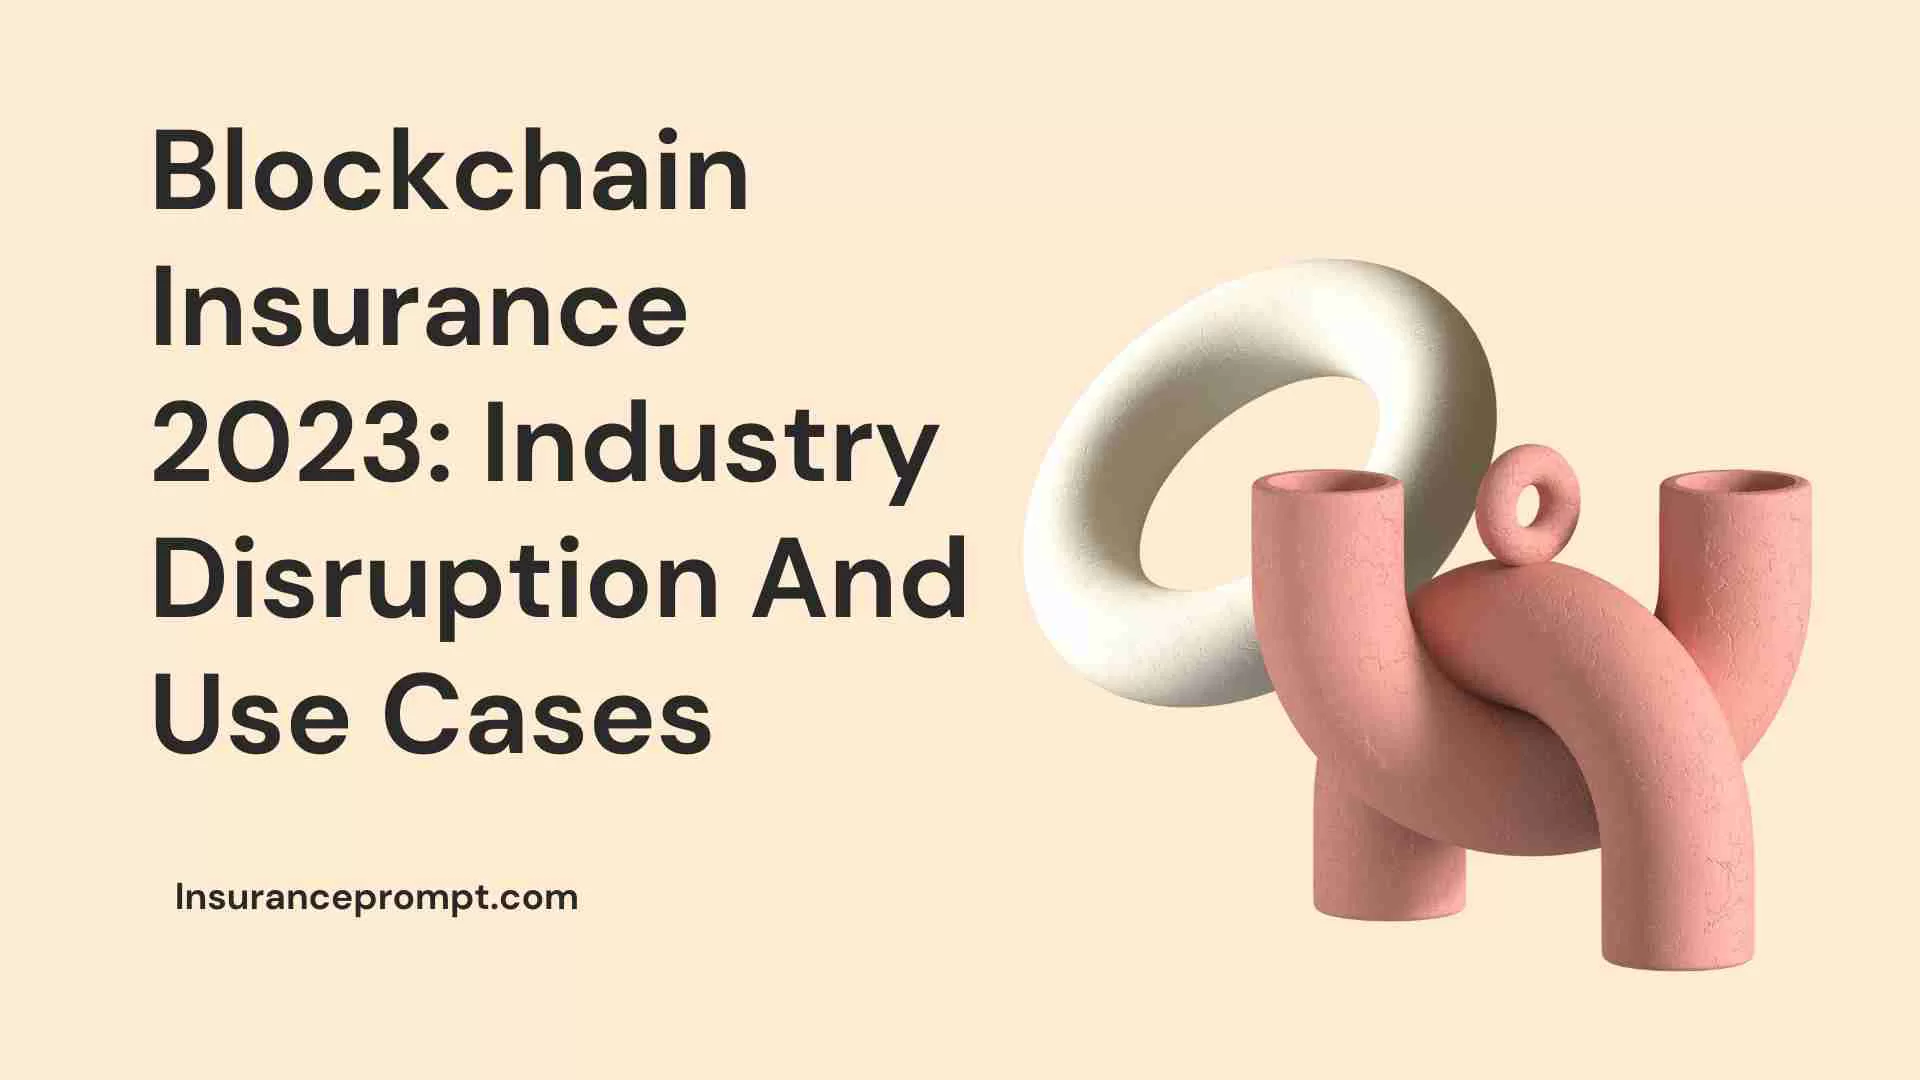 Blockchain Insurance 2023: Industry Disruption And Use Cases